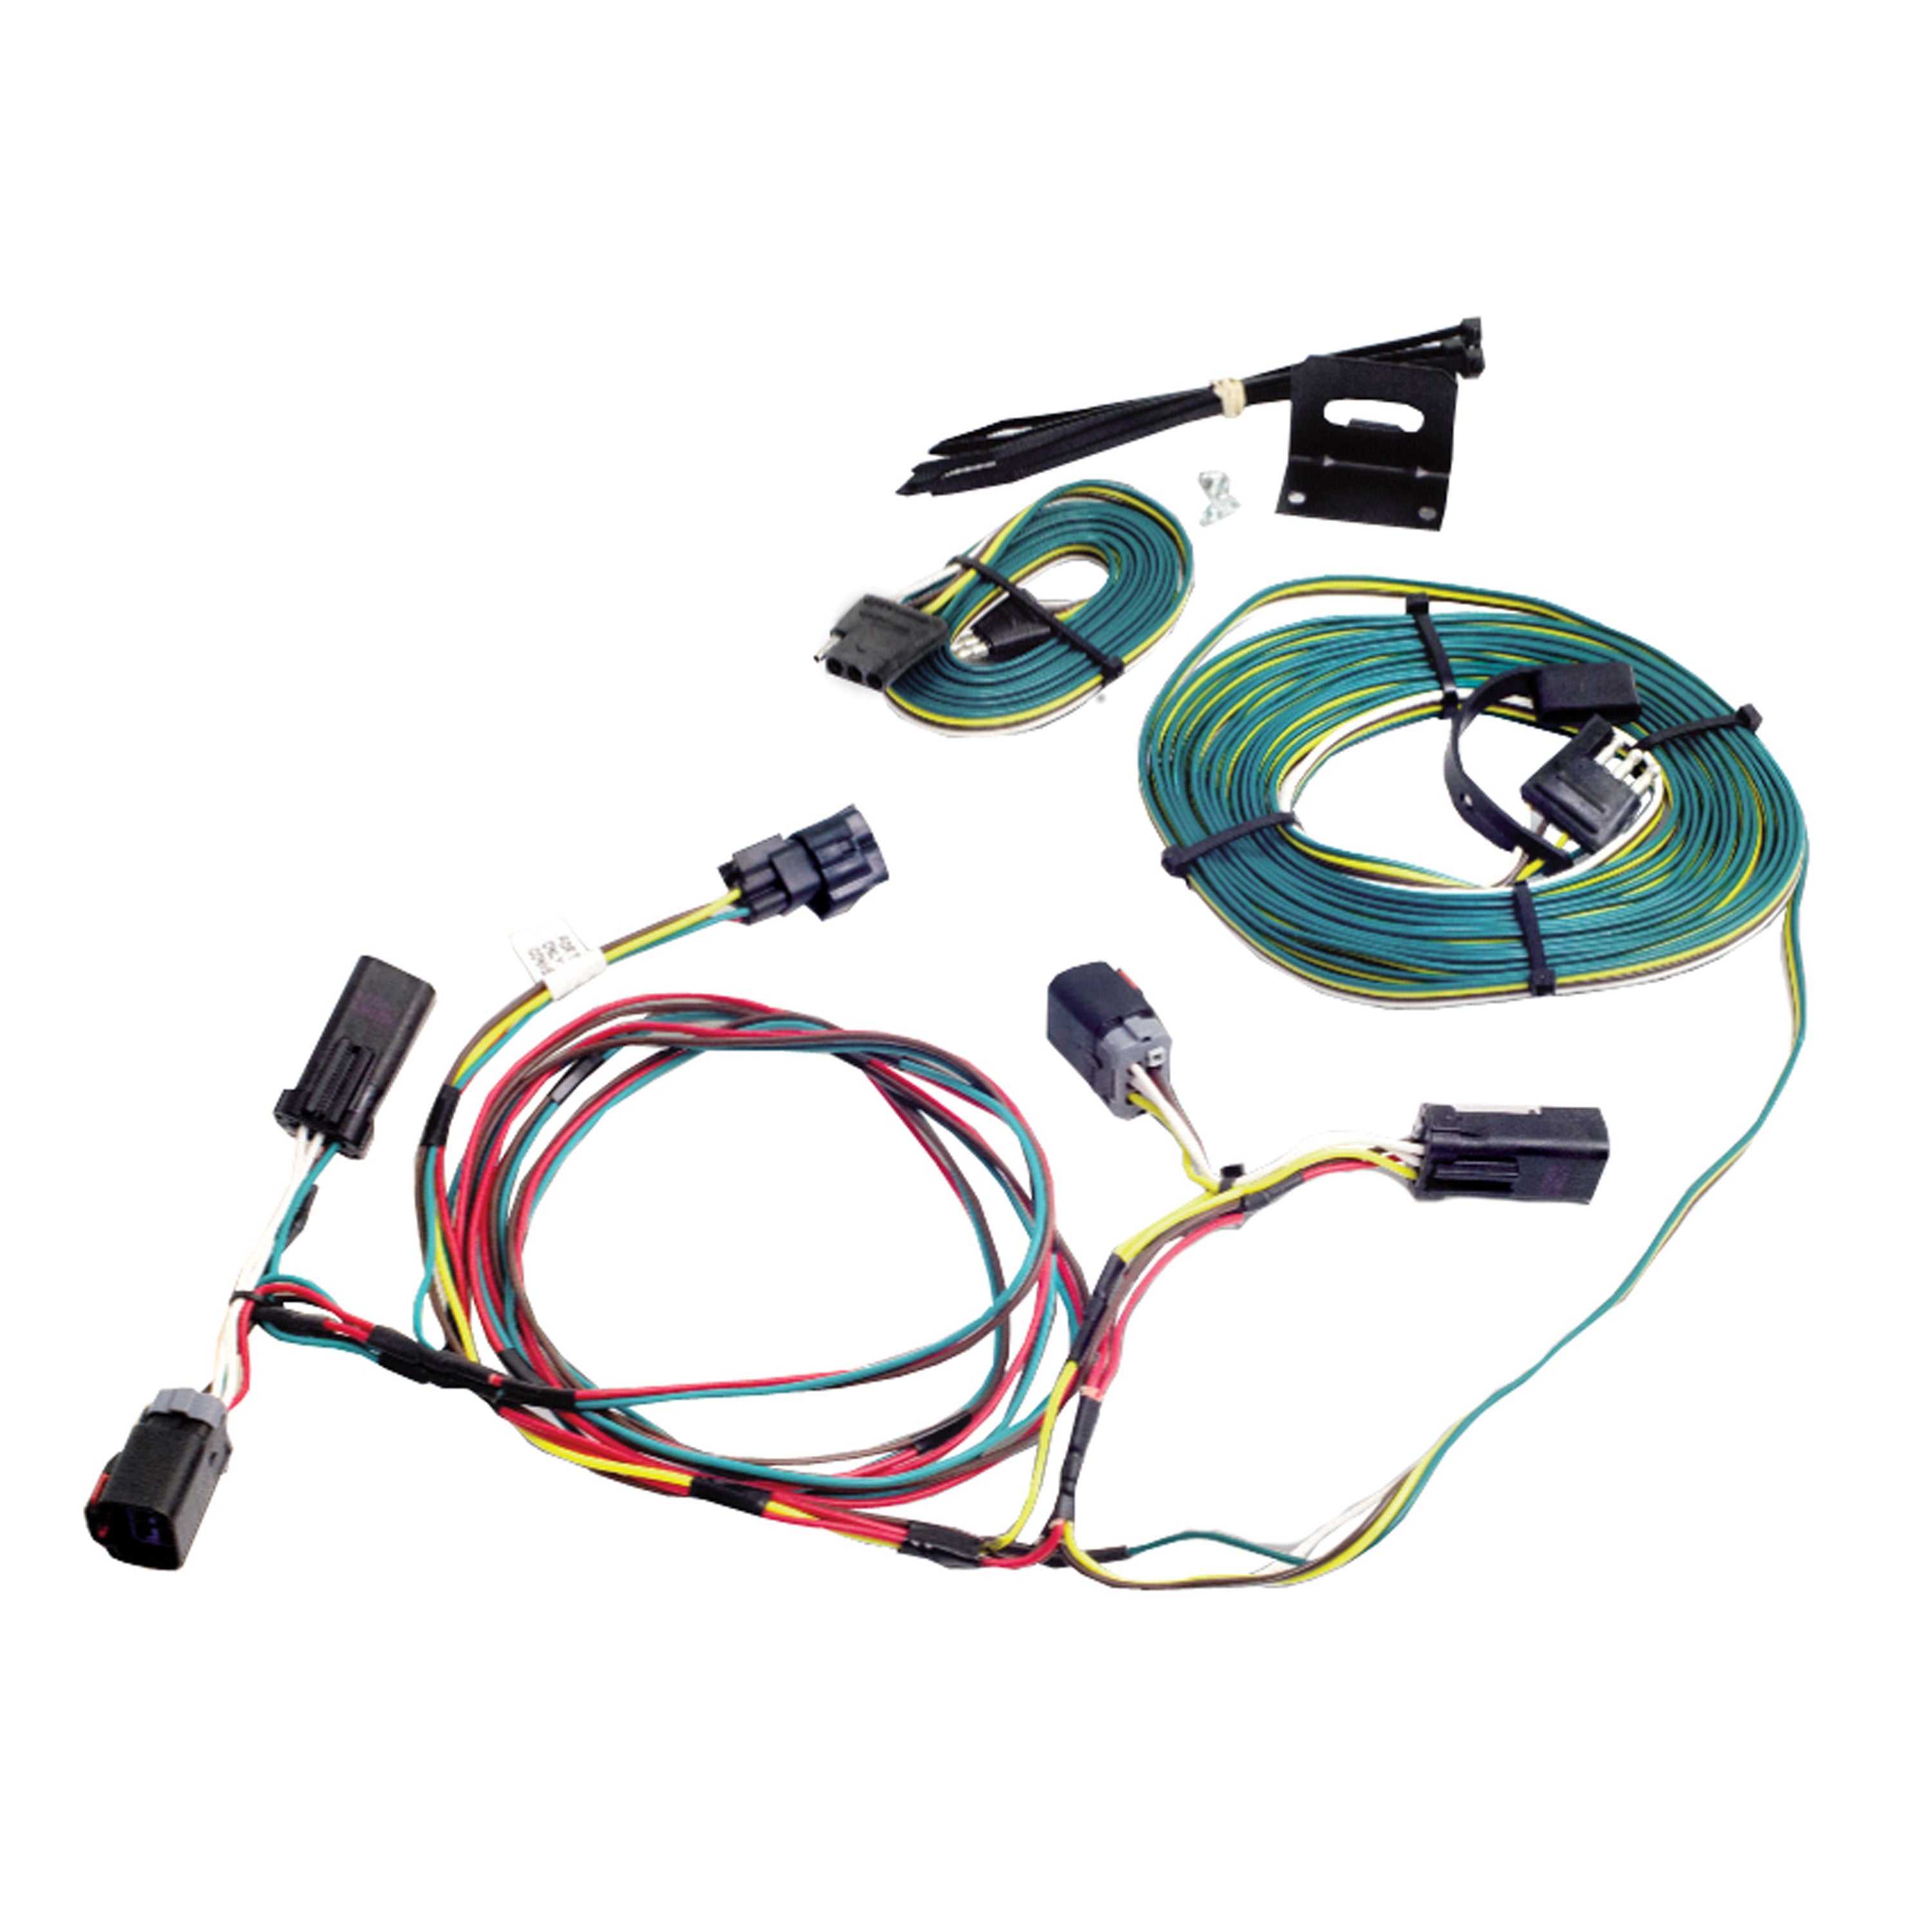 Demco 9523080 Towed Connector Vehicle Wiring Kit - For Select Ford/Lincoln/Mercury